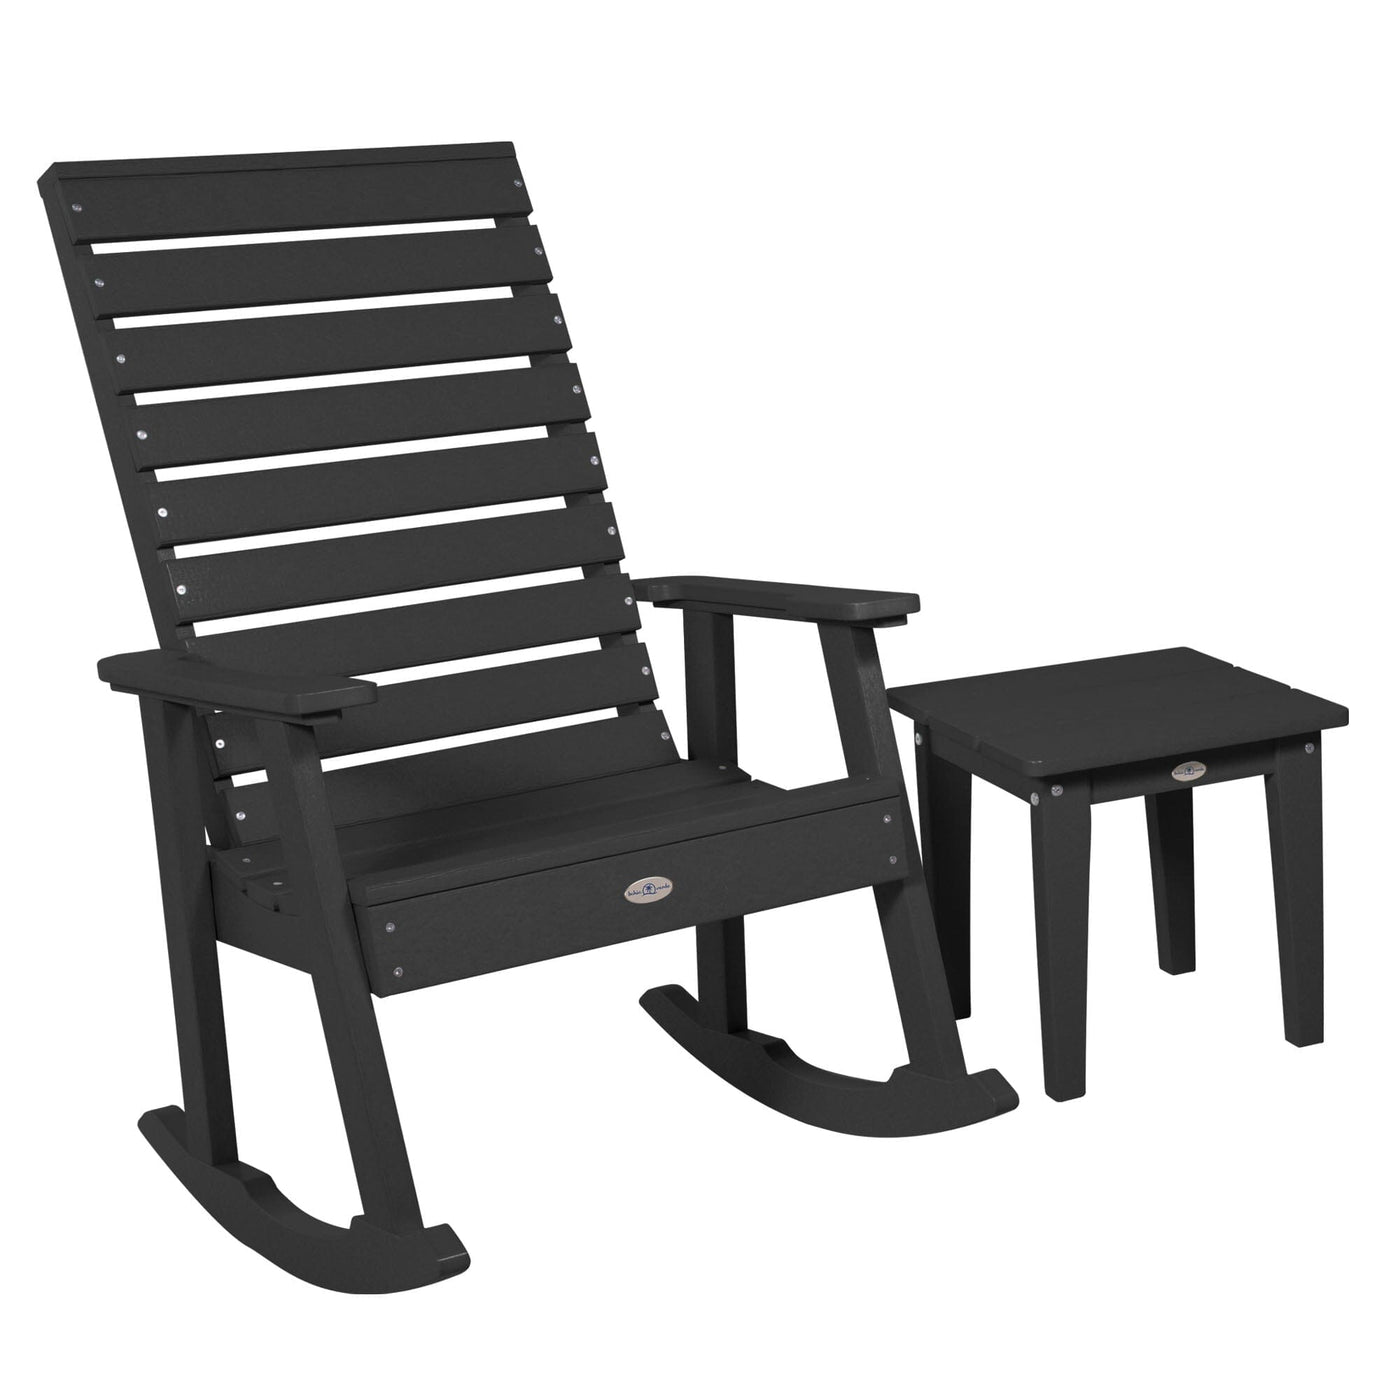 Riverside Rocking Chair and Side Table 2pc Set Kitted Set Bahia Verde Outdoors Black Sand 